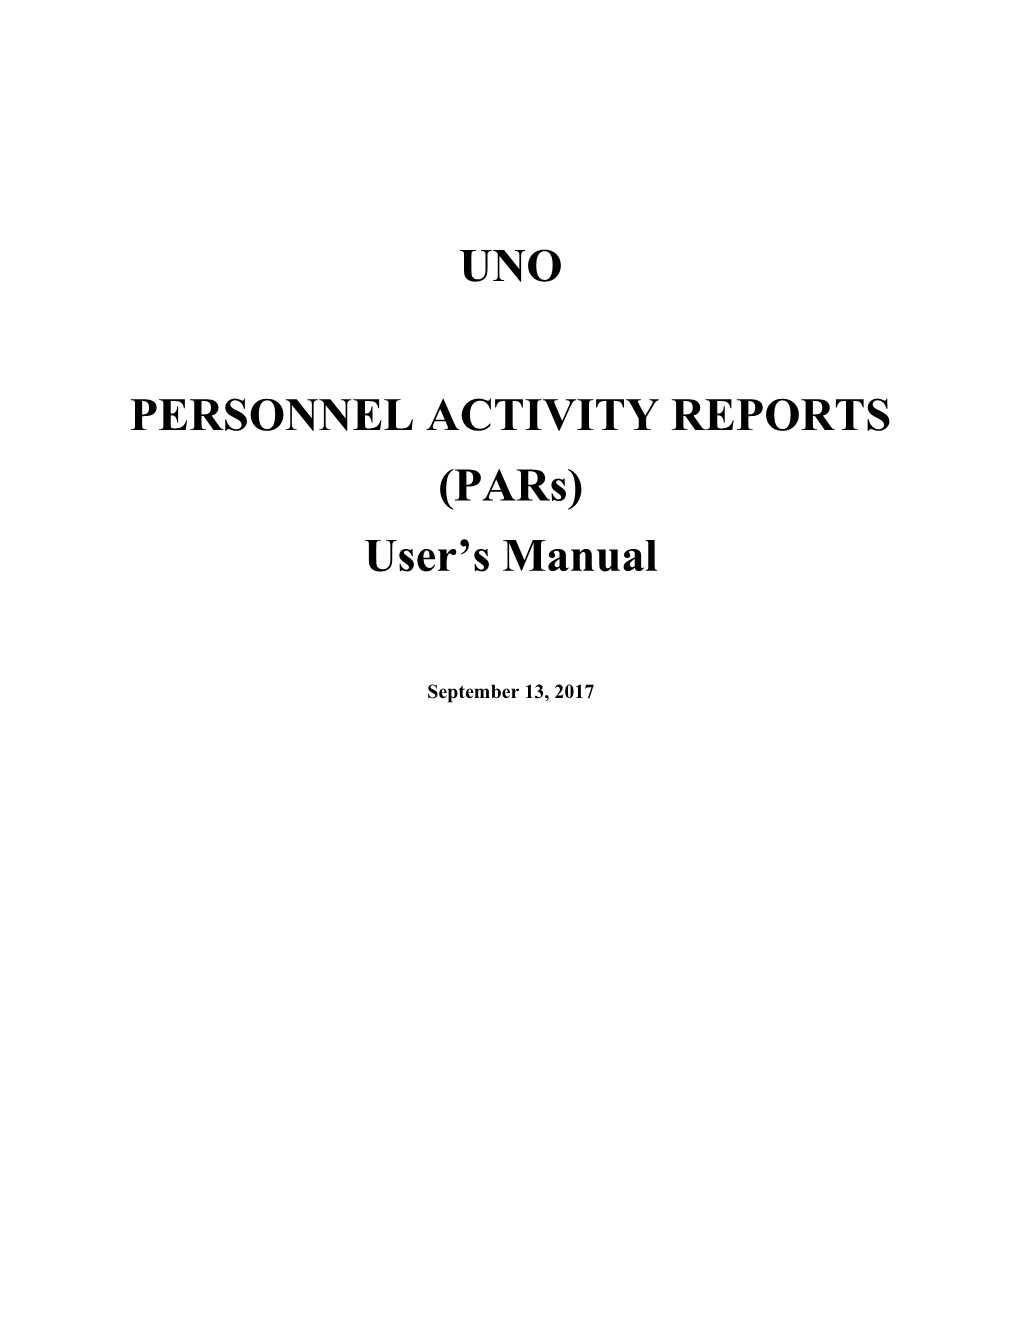 Personnel Activity Reports